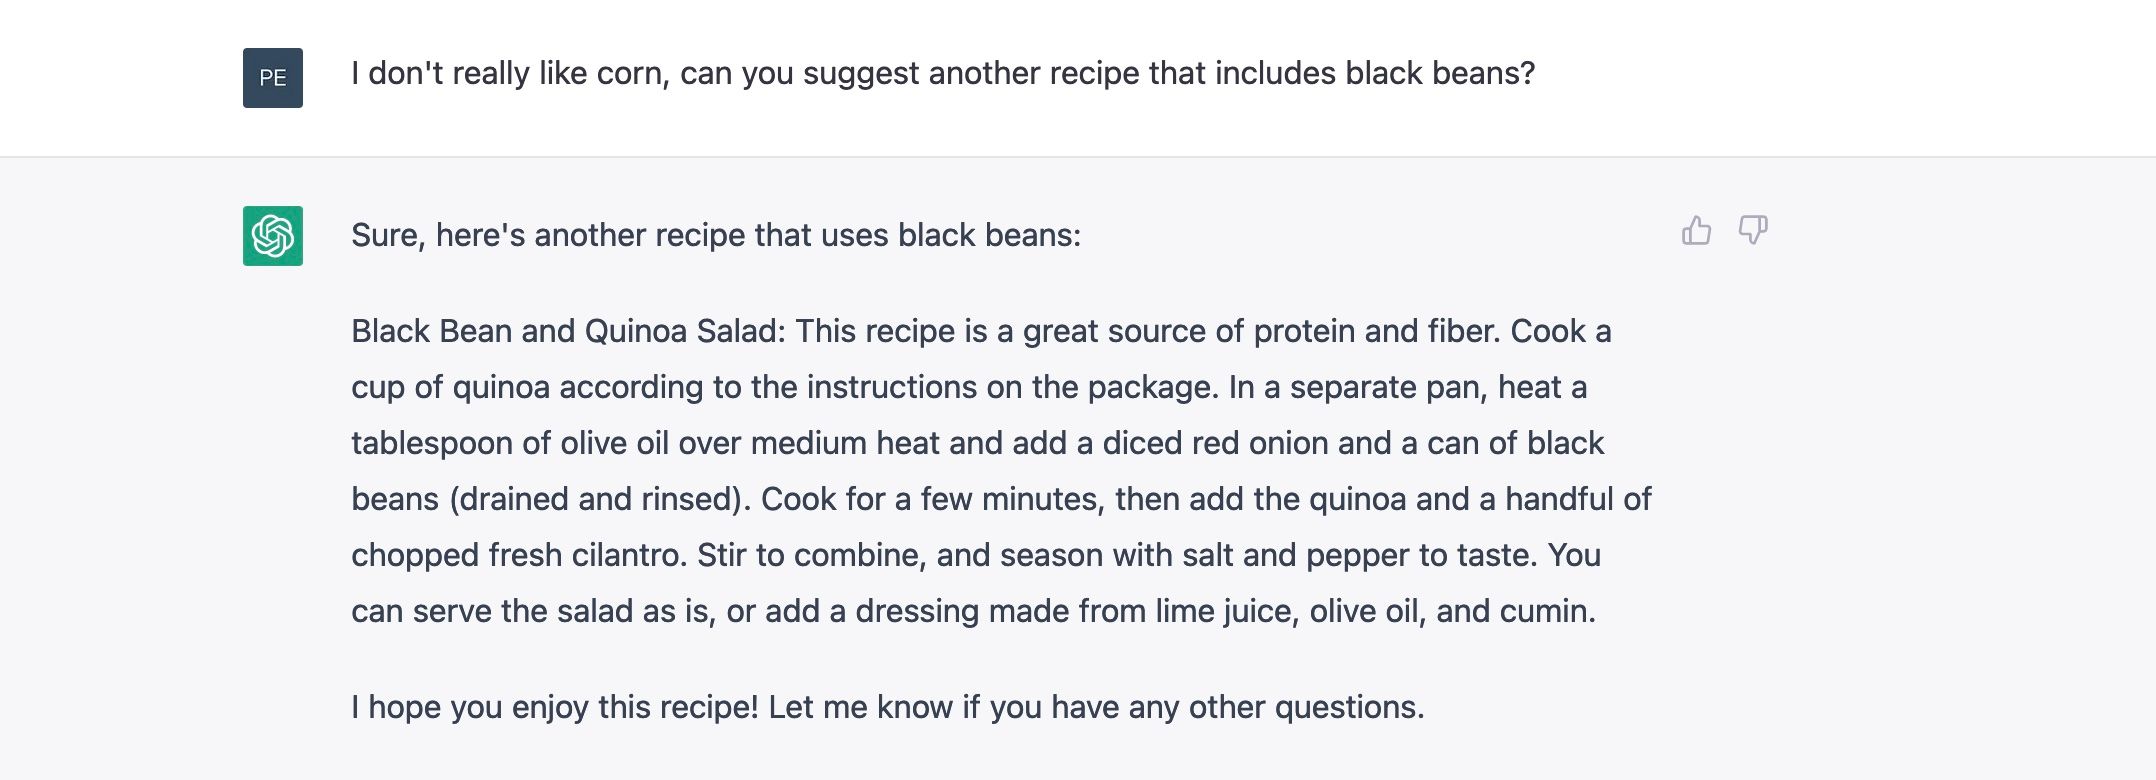 ChatGPT suggests a different recipe that doesn't use corn.